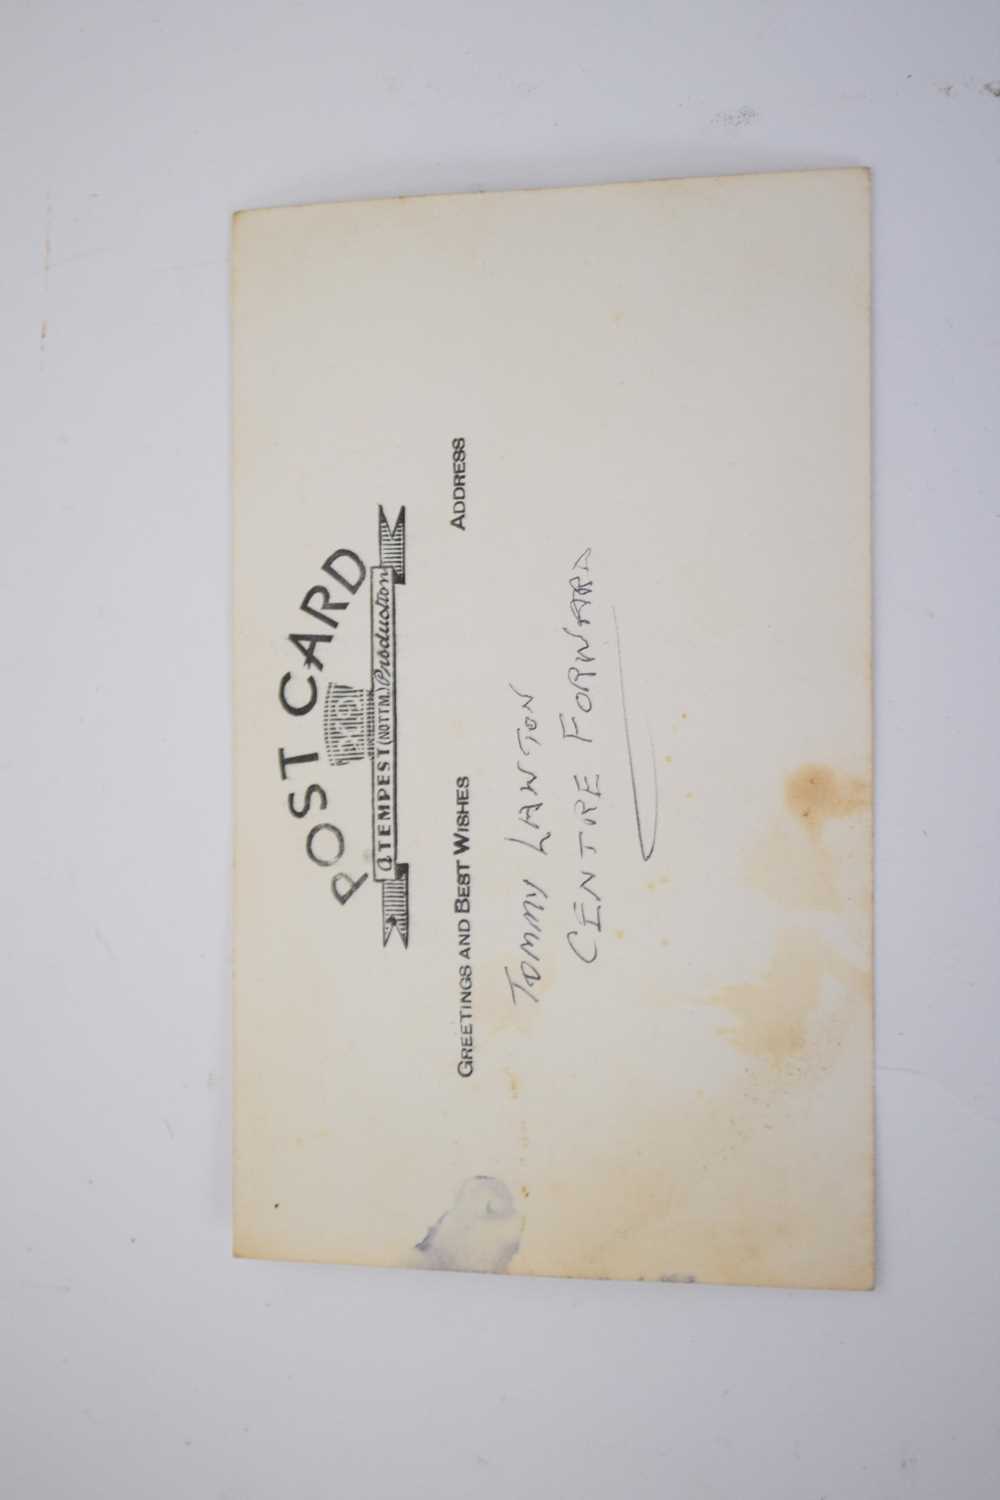 Photographic card of Notts County Football Club Season 1949/50, signed verso by Tommy Lawton, Centre - Image 2 of 2